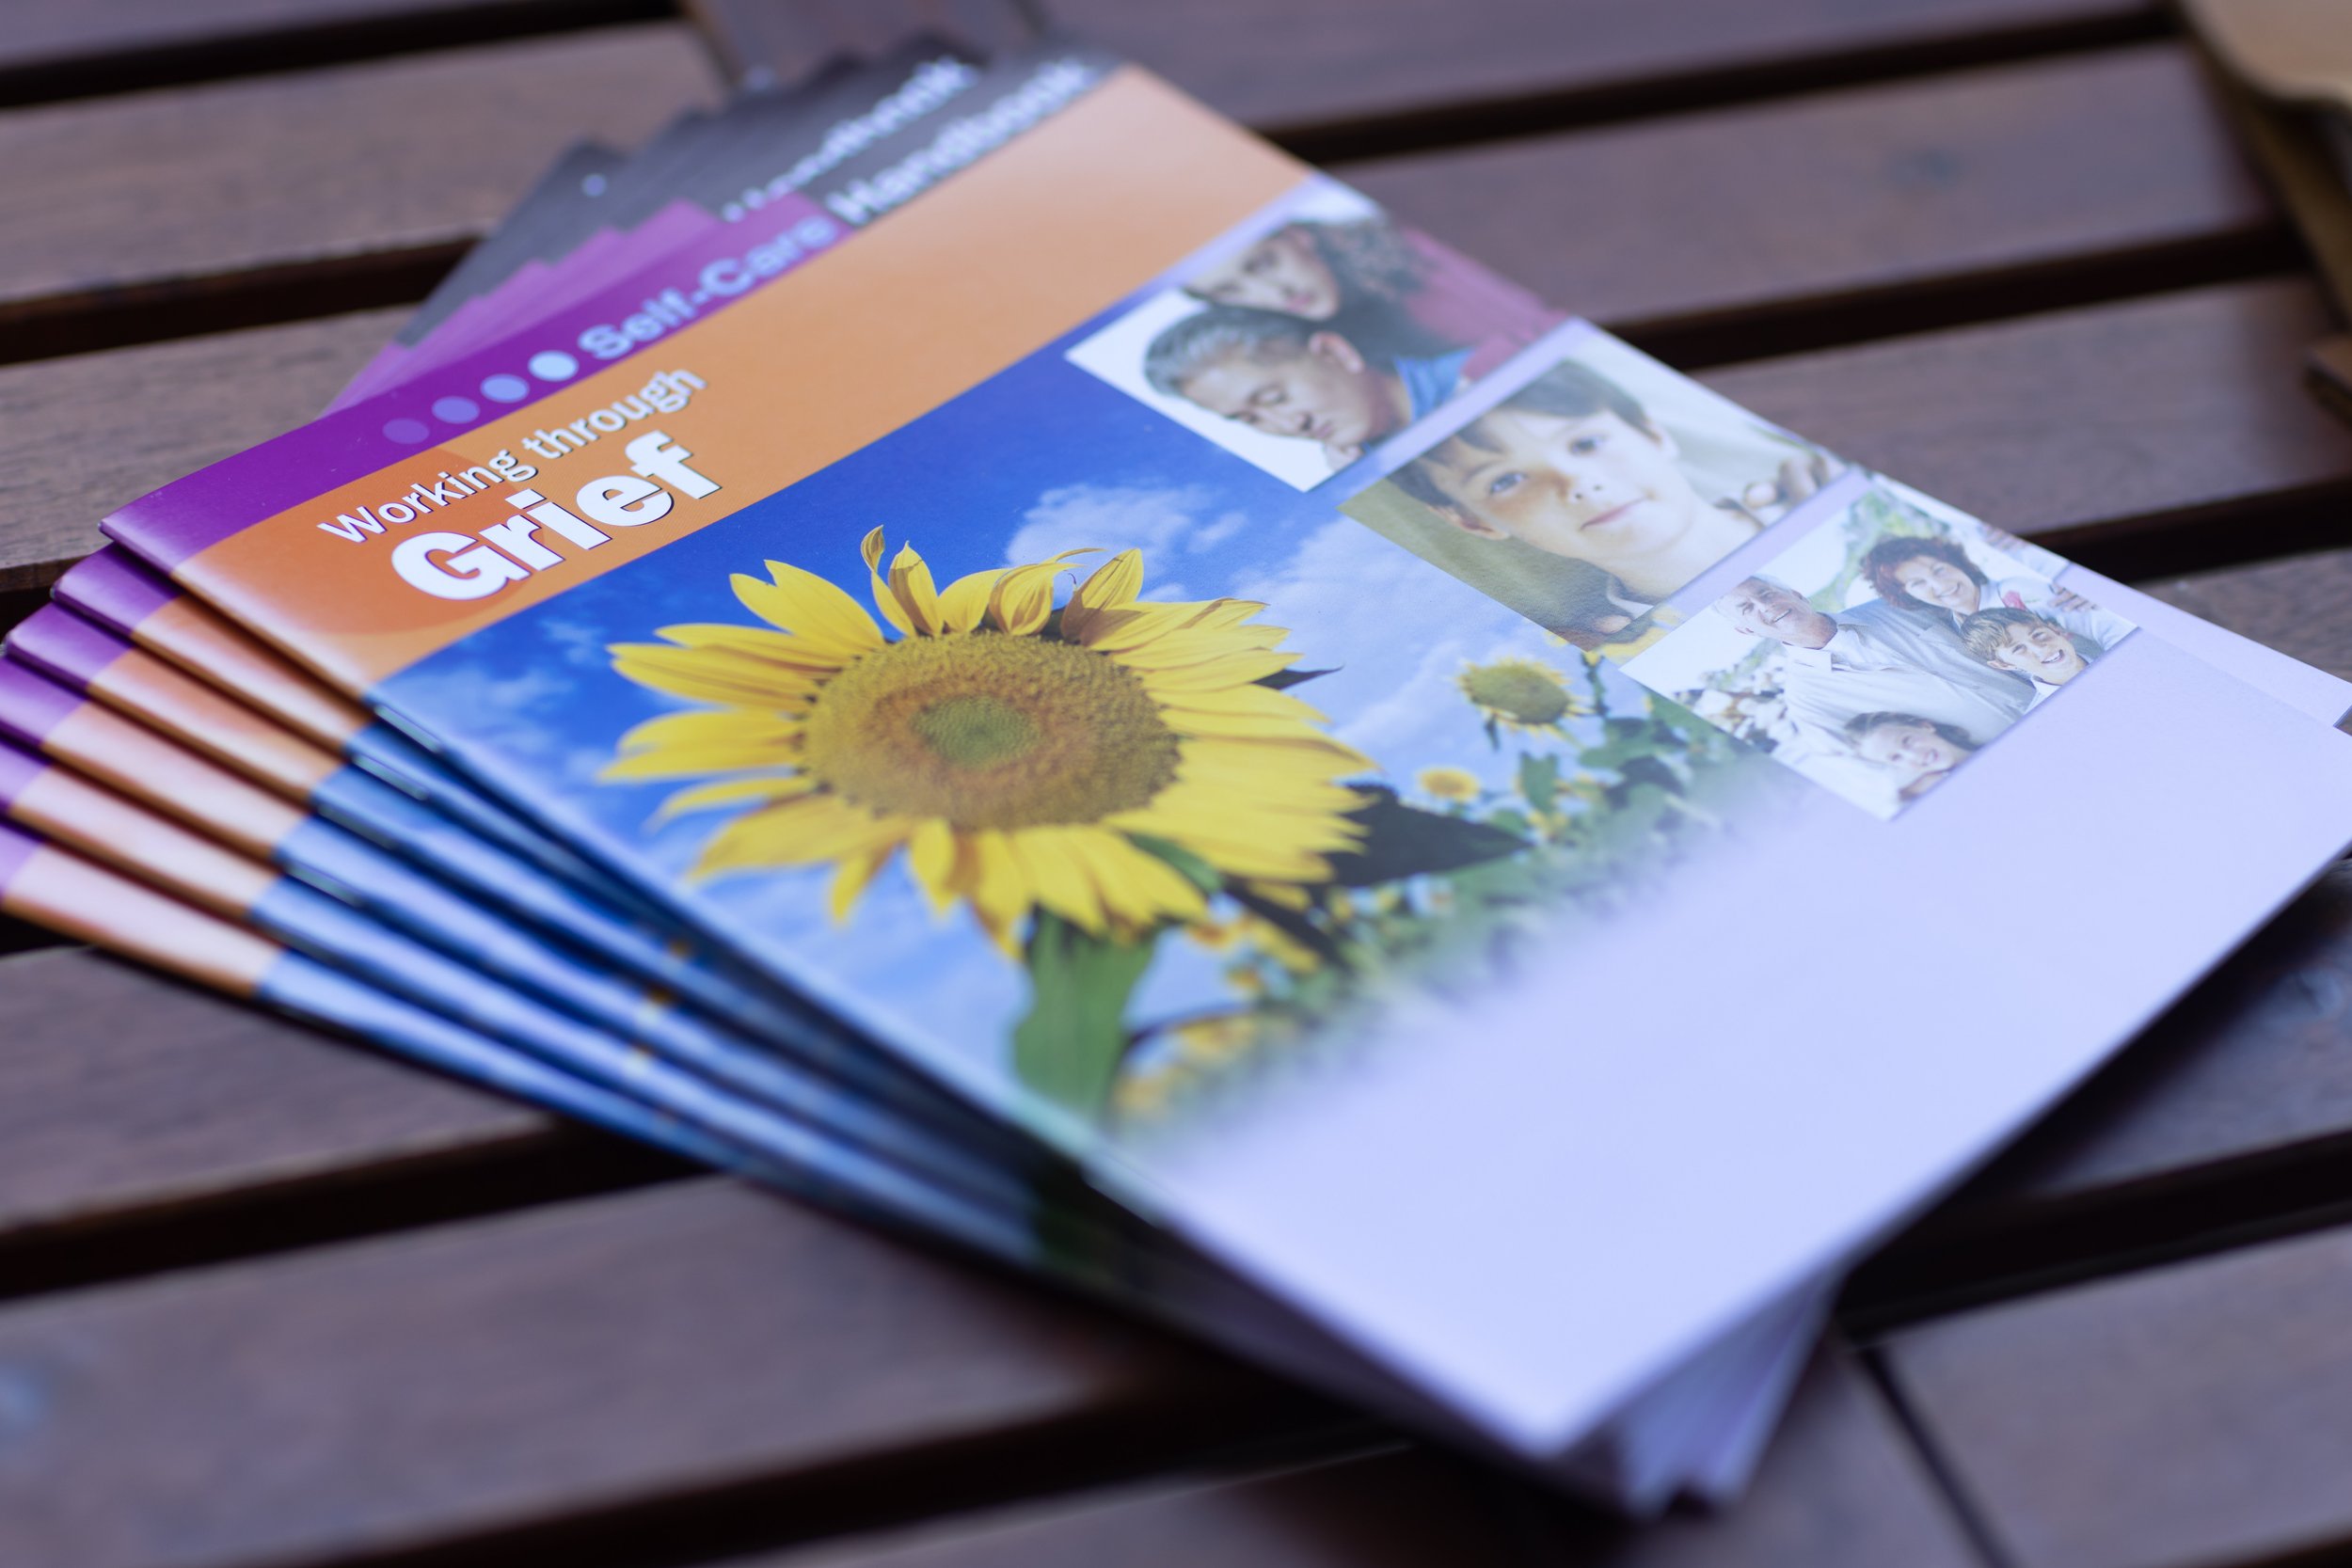  Grief workbooks were available to all attendees during Mini Golf Gathering for Grievers on 6.4.22 